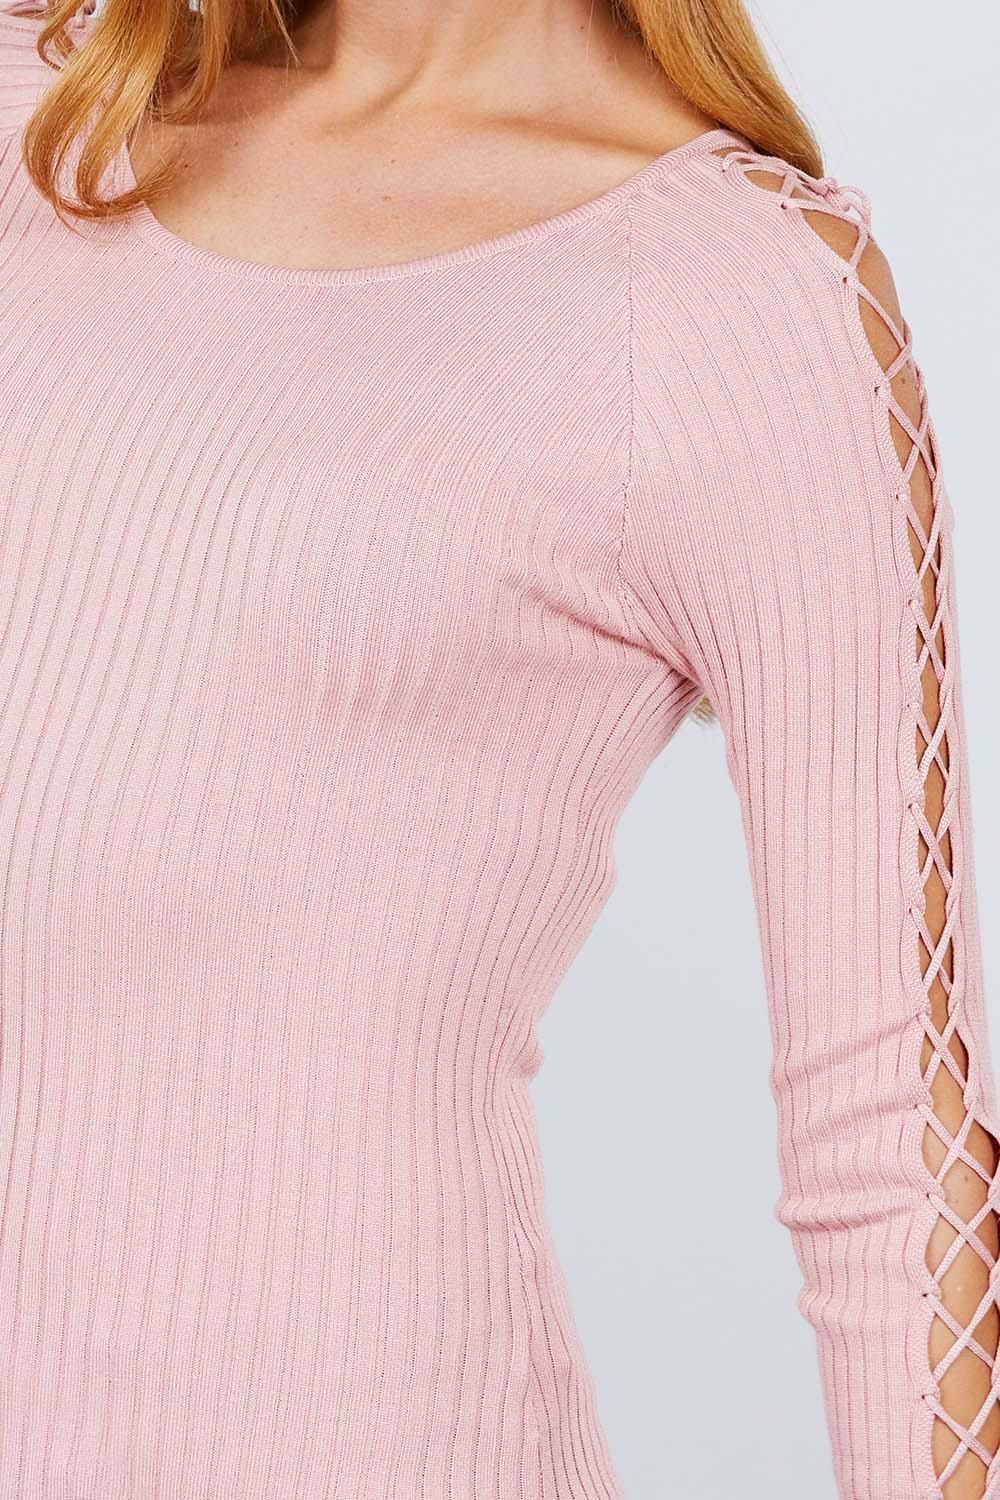 Long Sleeve W/strappy Detail Round Neck Rib Sweater Top Naughty Smile Fashion